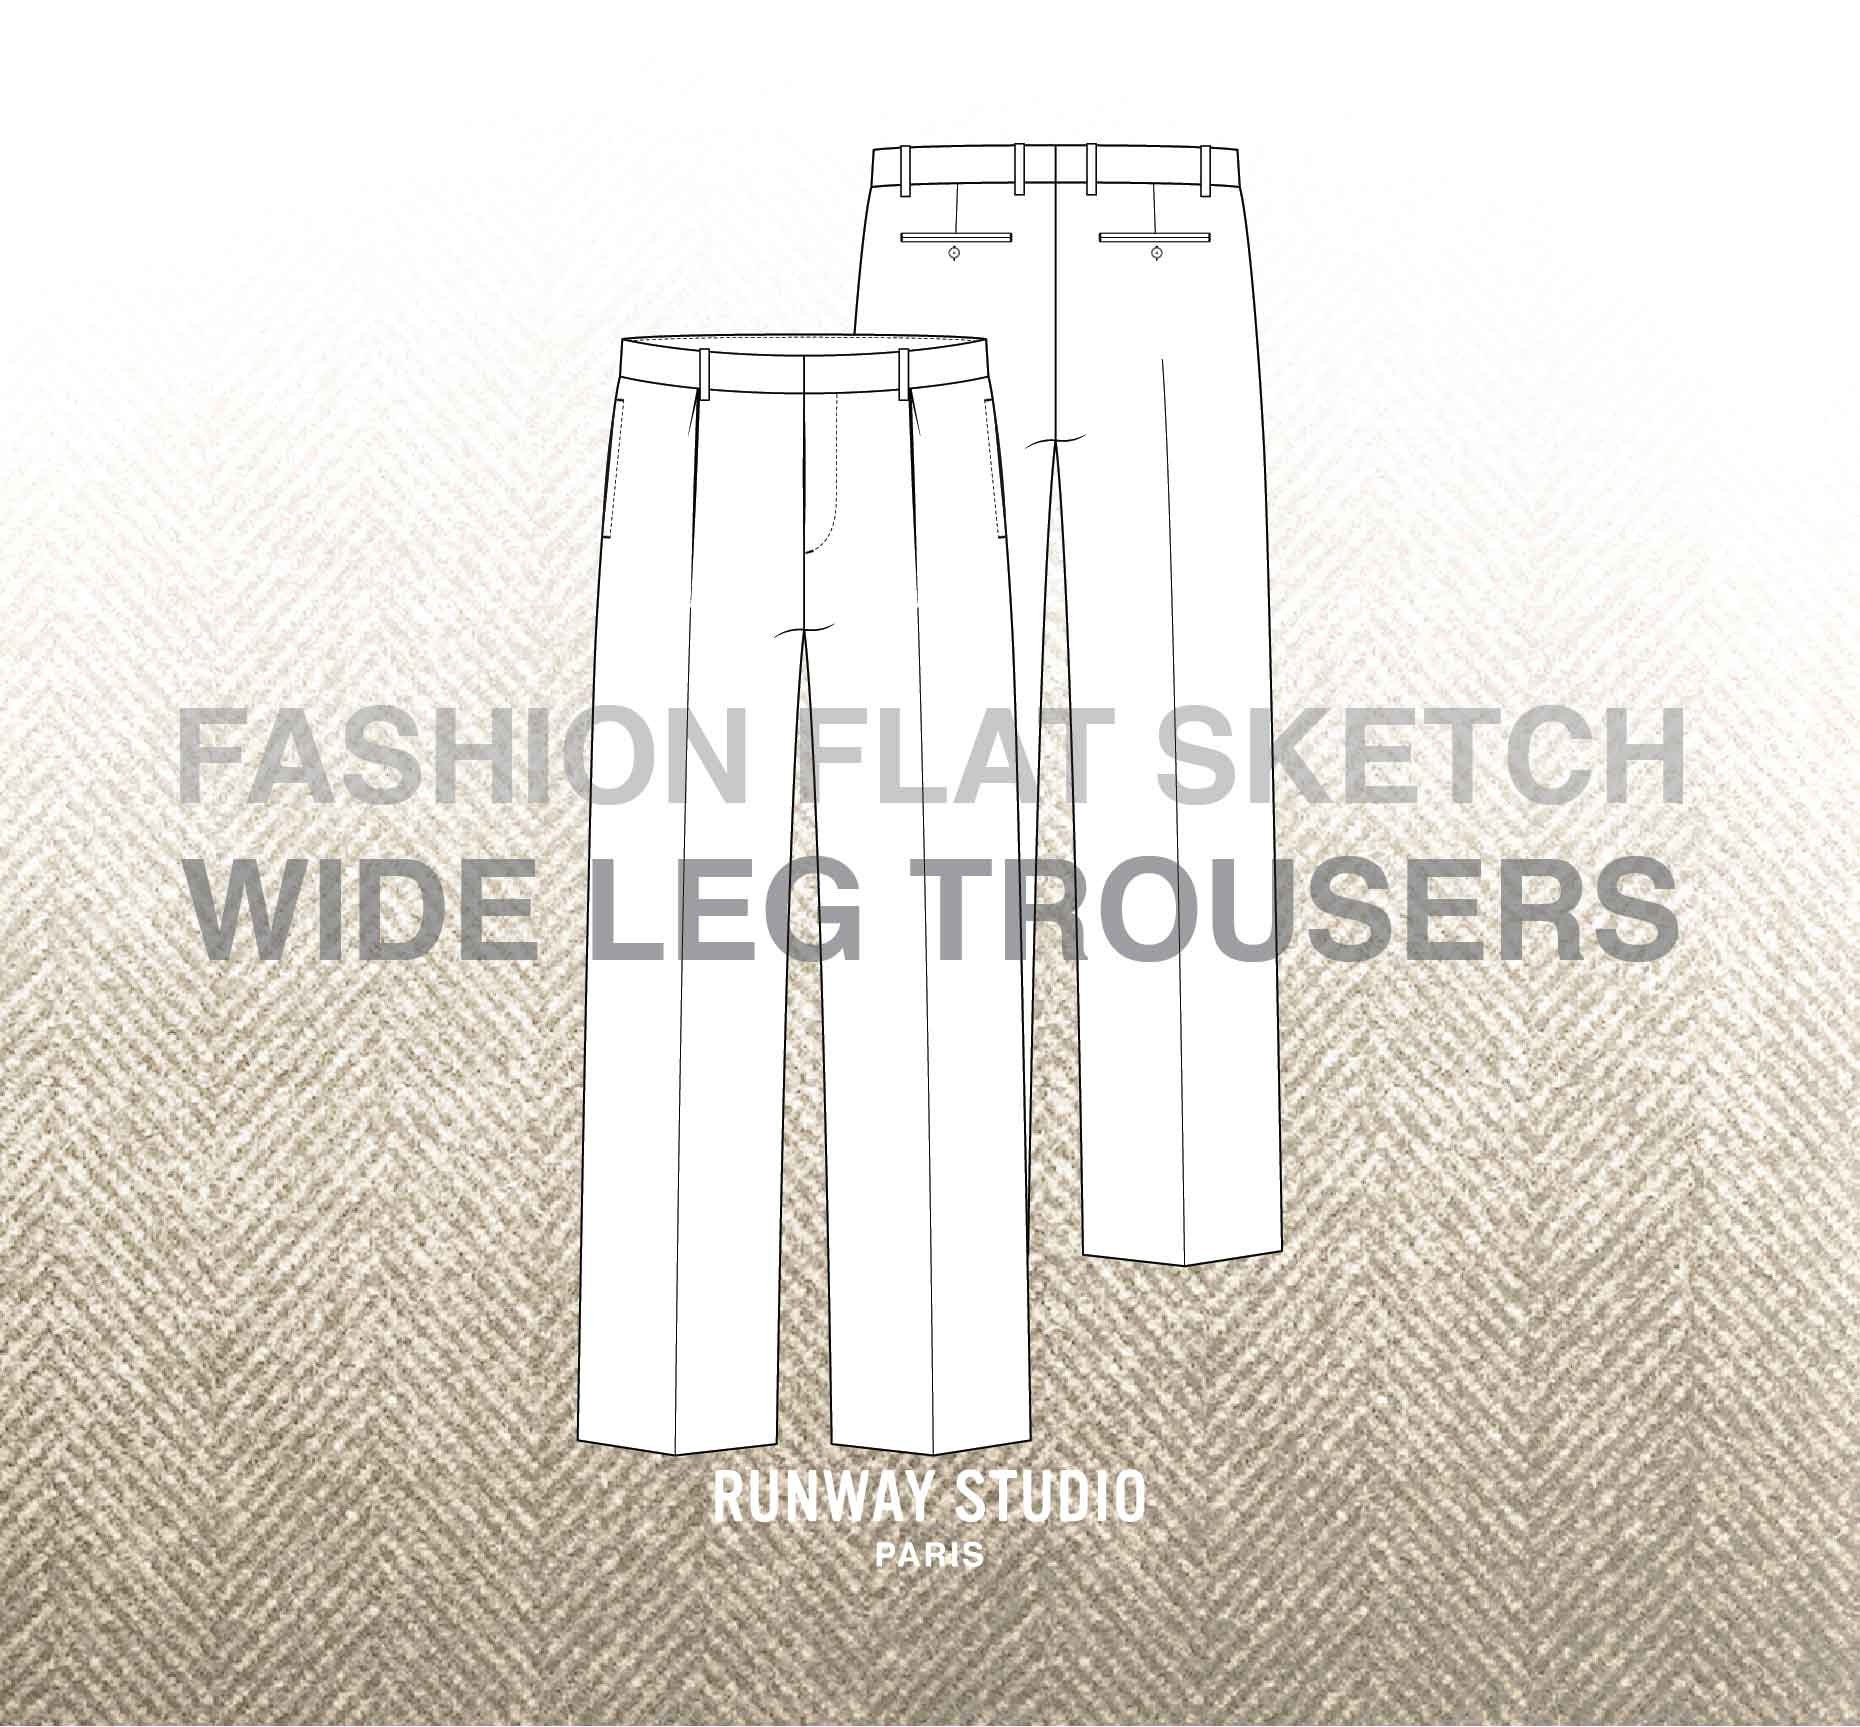 PANTS fashion flat sketch template  Stock Image  Everypixel